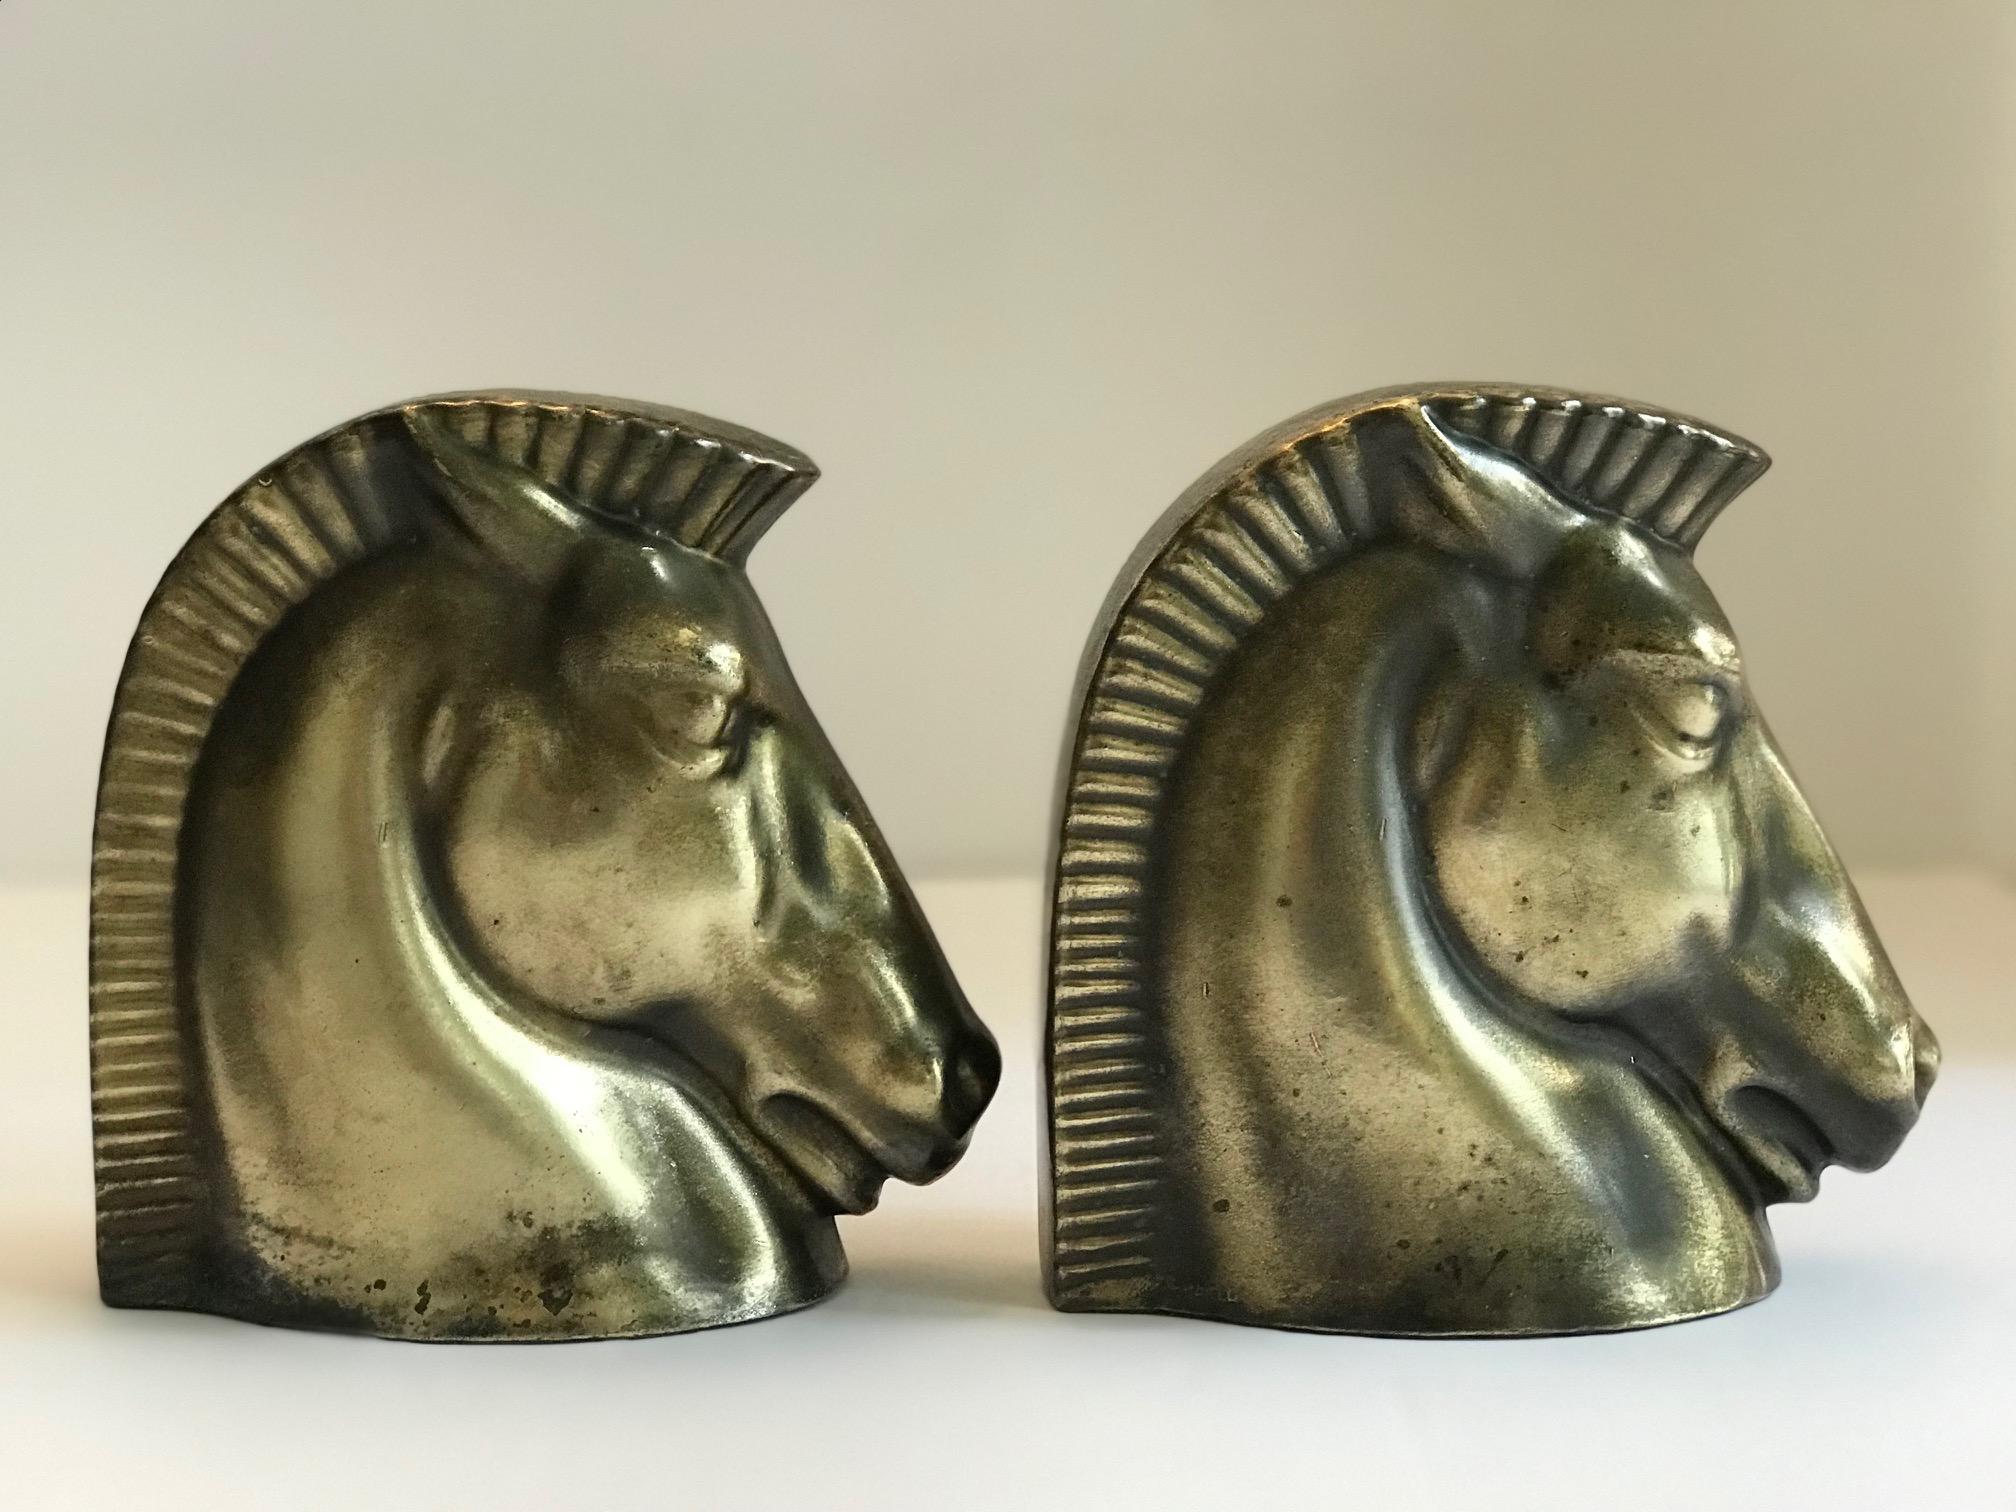 Pair of Art Deco Brass Plated Trojan Horse Bookends by Frankart 9